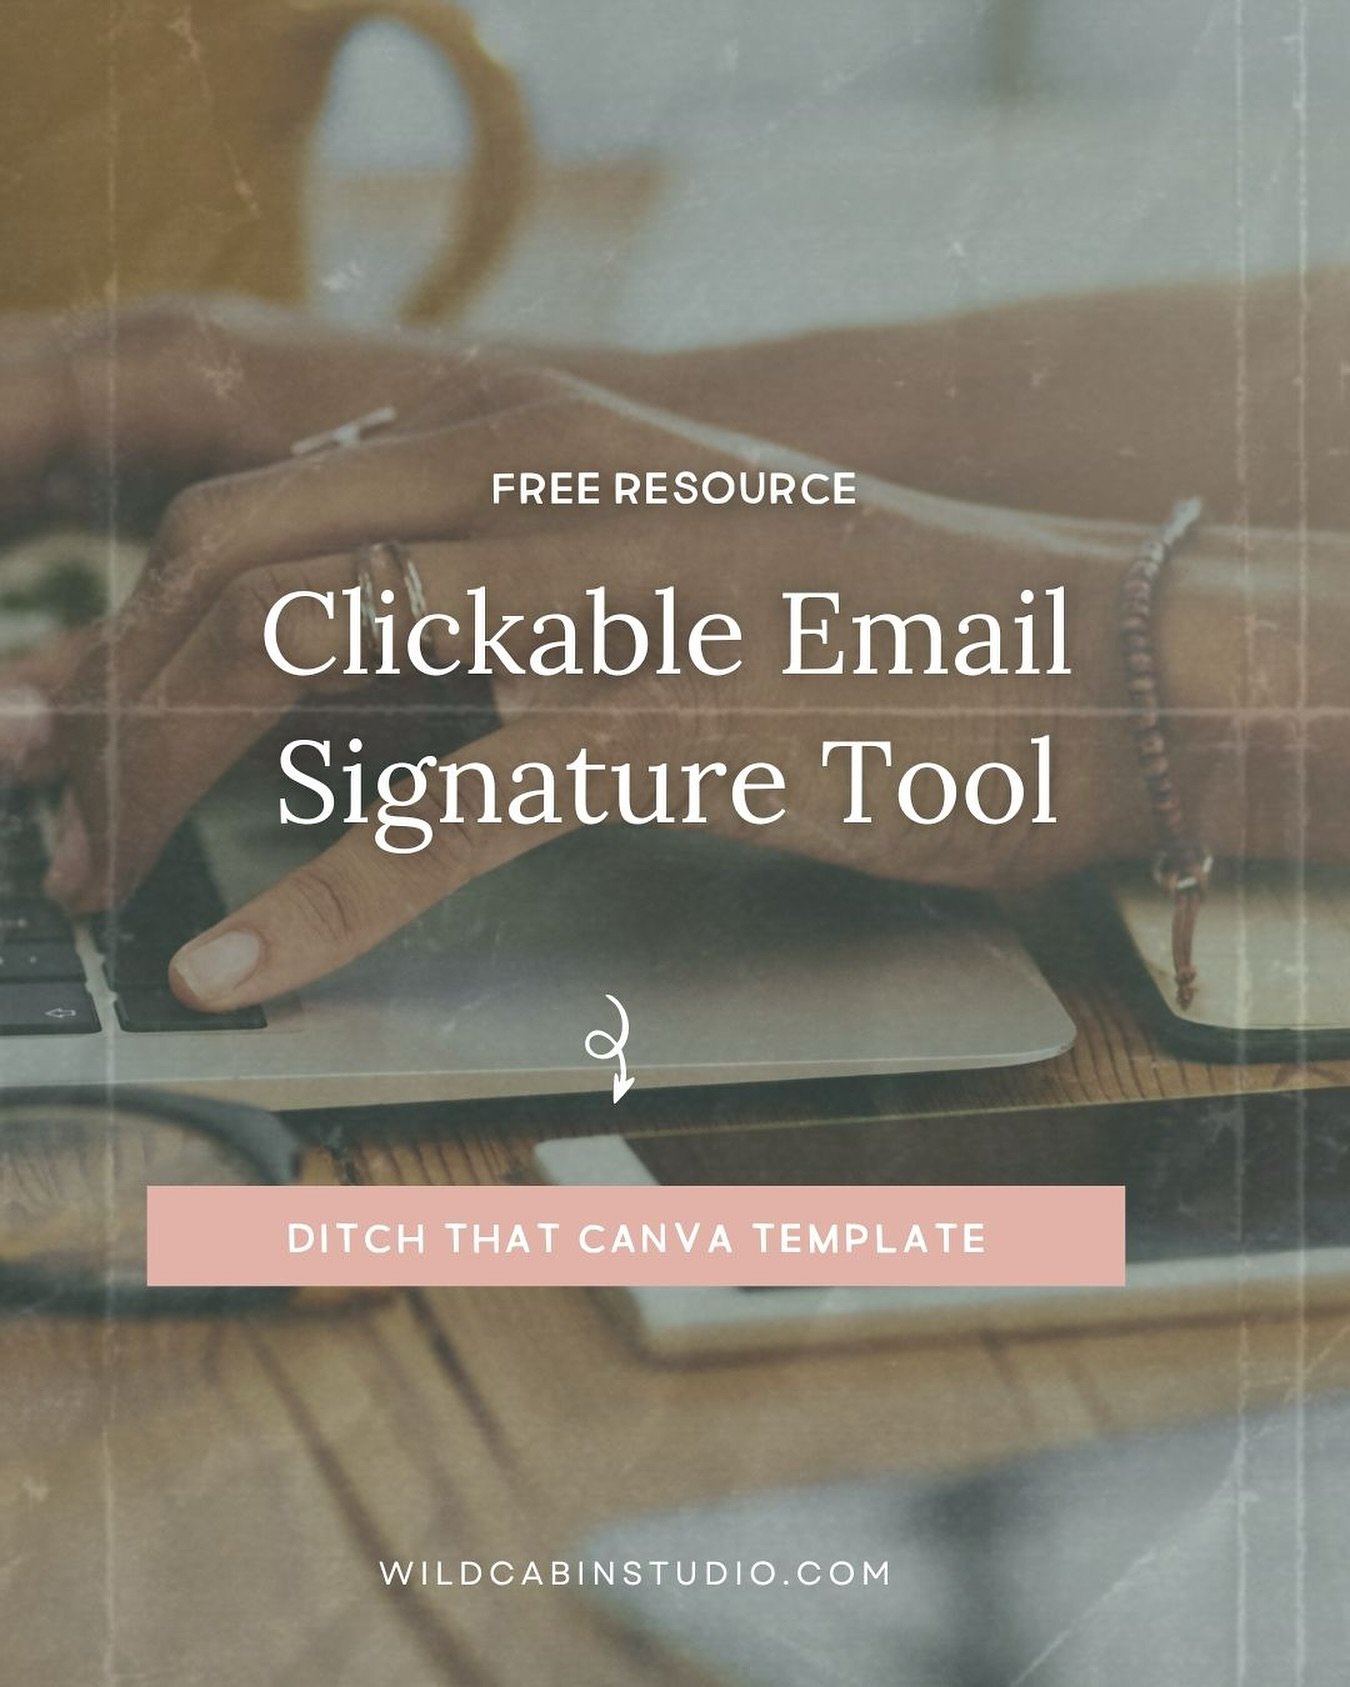 ✨ My favorite resource to share (and you should implement it now!): a clickable email signature! Not an affiliate or paid for this; I just love it.

✉️ Boost Traffic: Direct folks to your website and social profiles with just a click, driving visibil